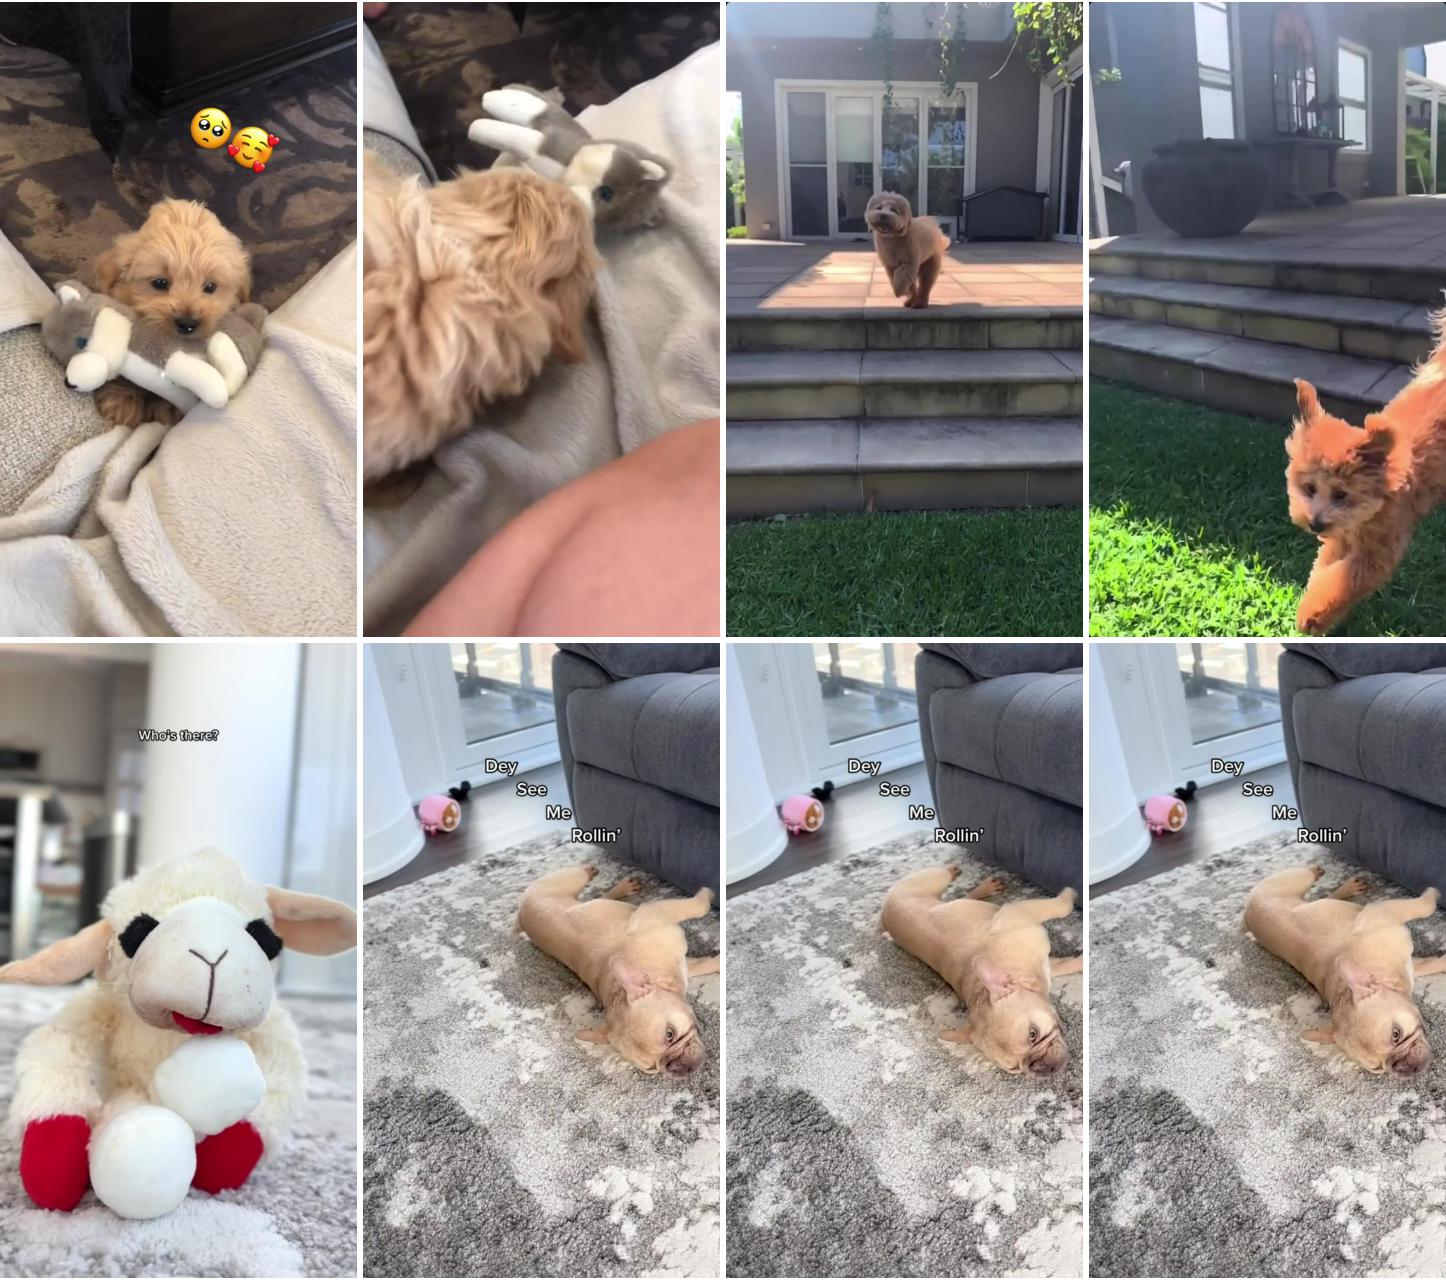 Adorable puppy check out this cute dog video kobethesmoodle on tiktok; cute puppies